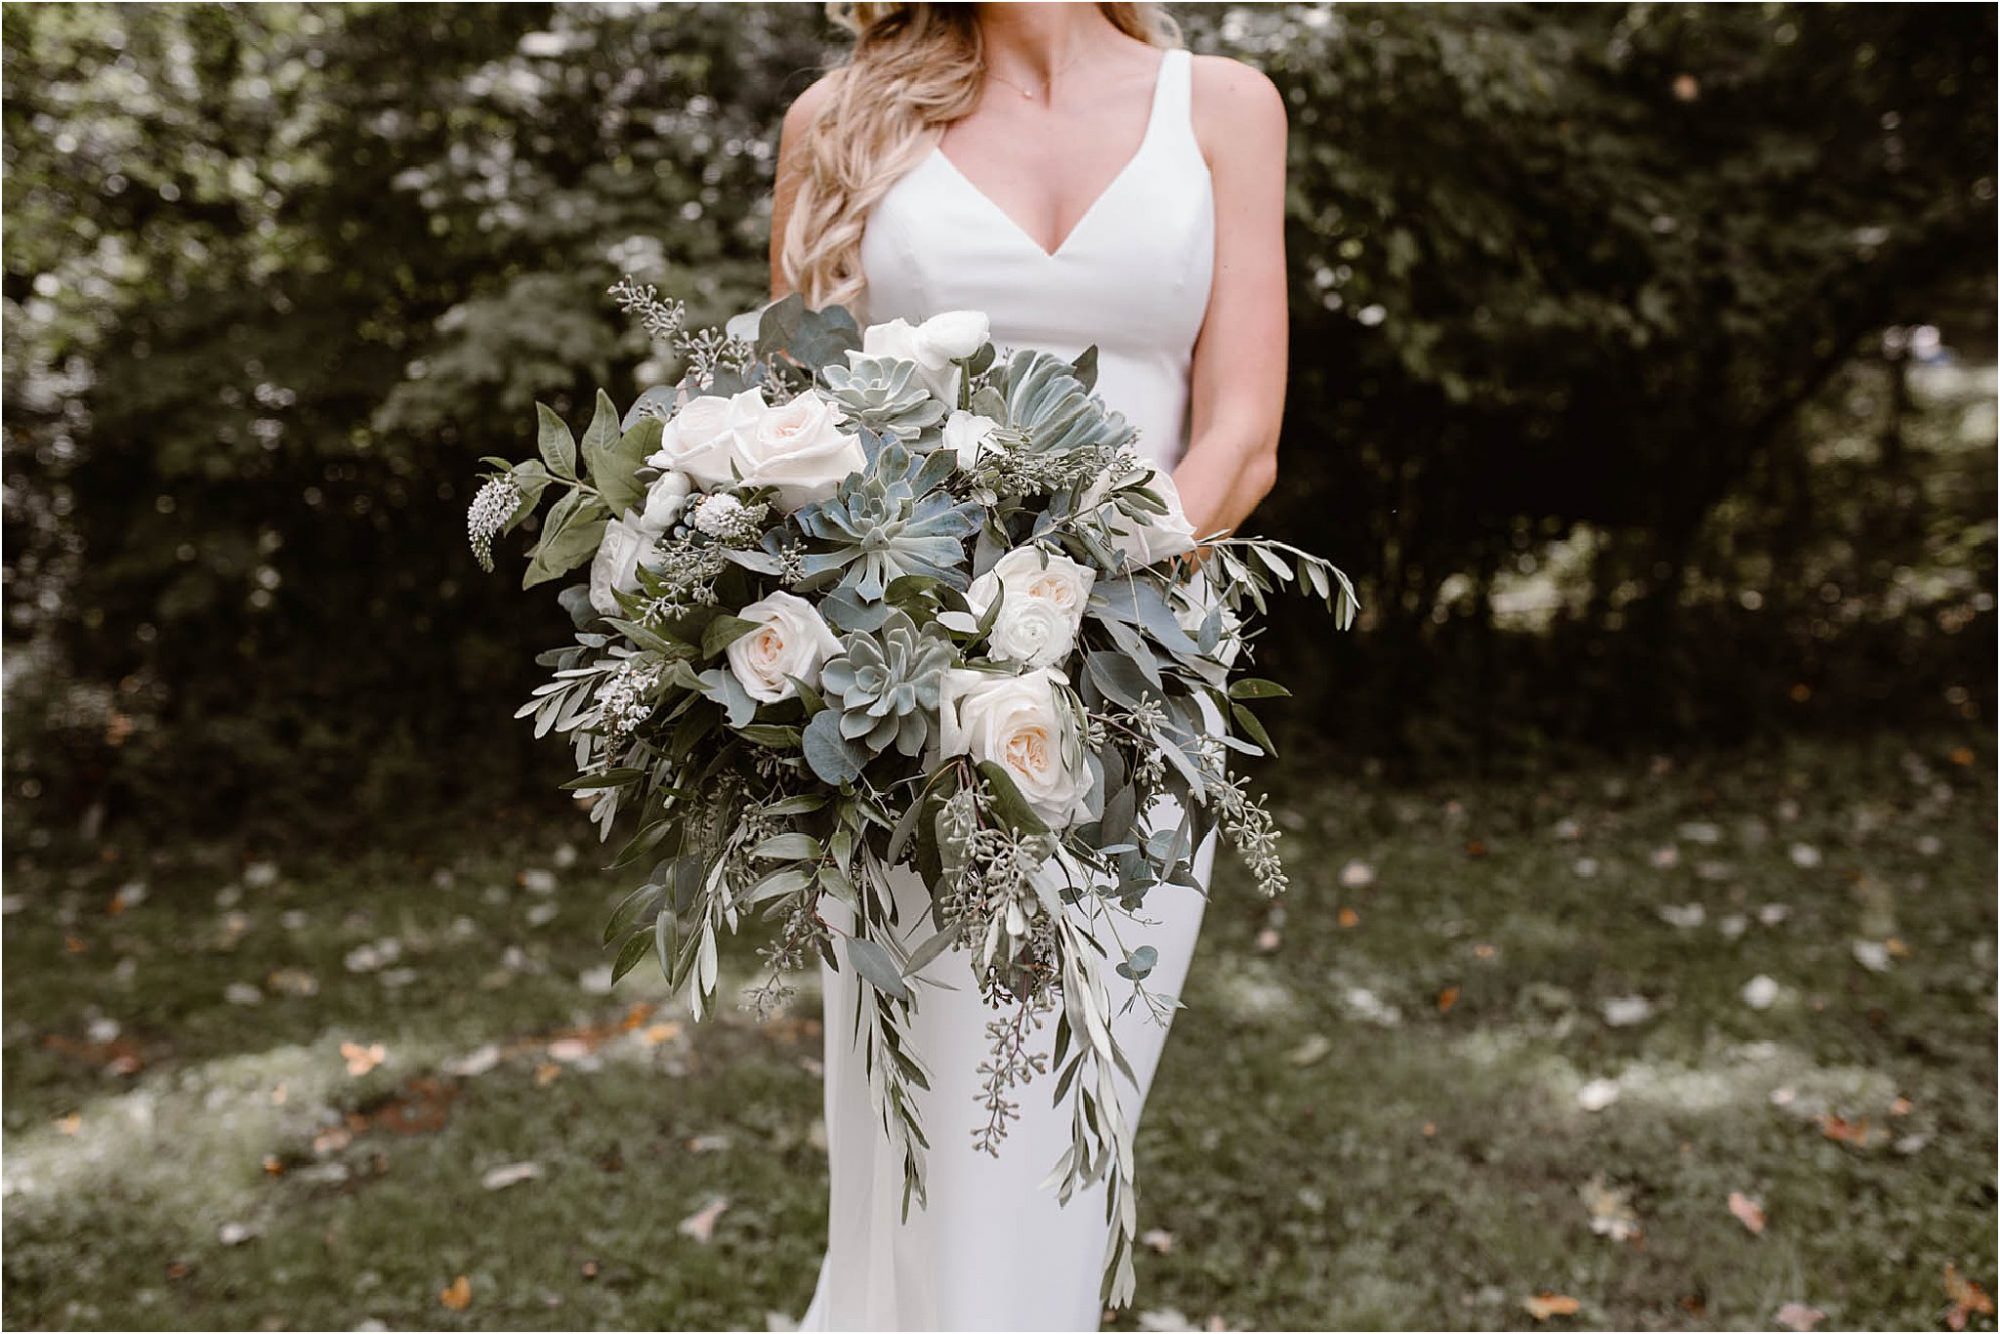 bridal bouquet by Melissa Timm Designs in Kn